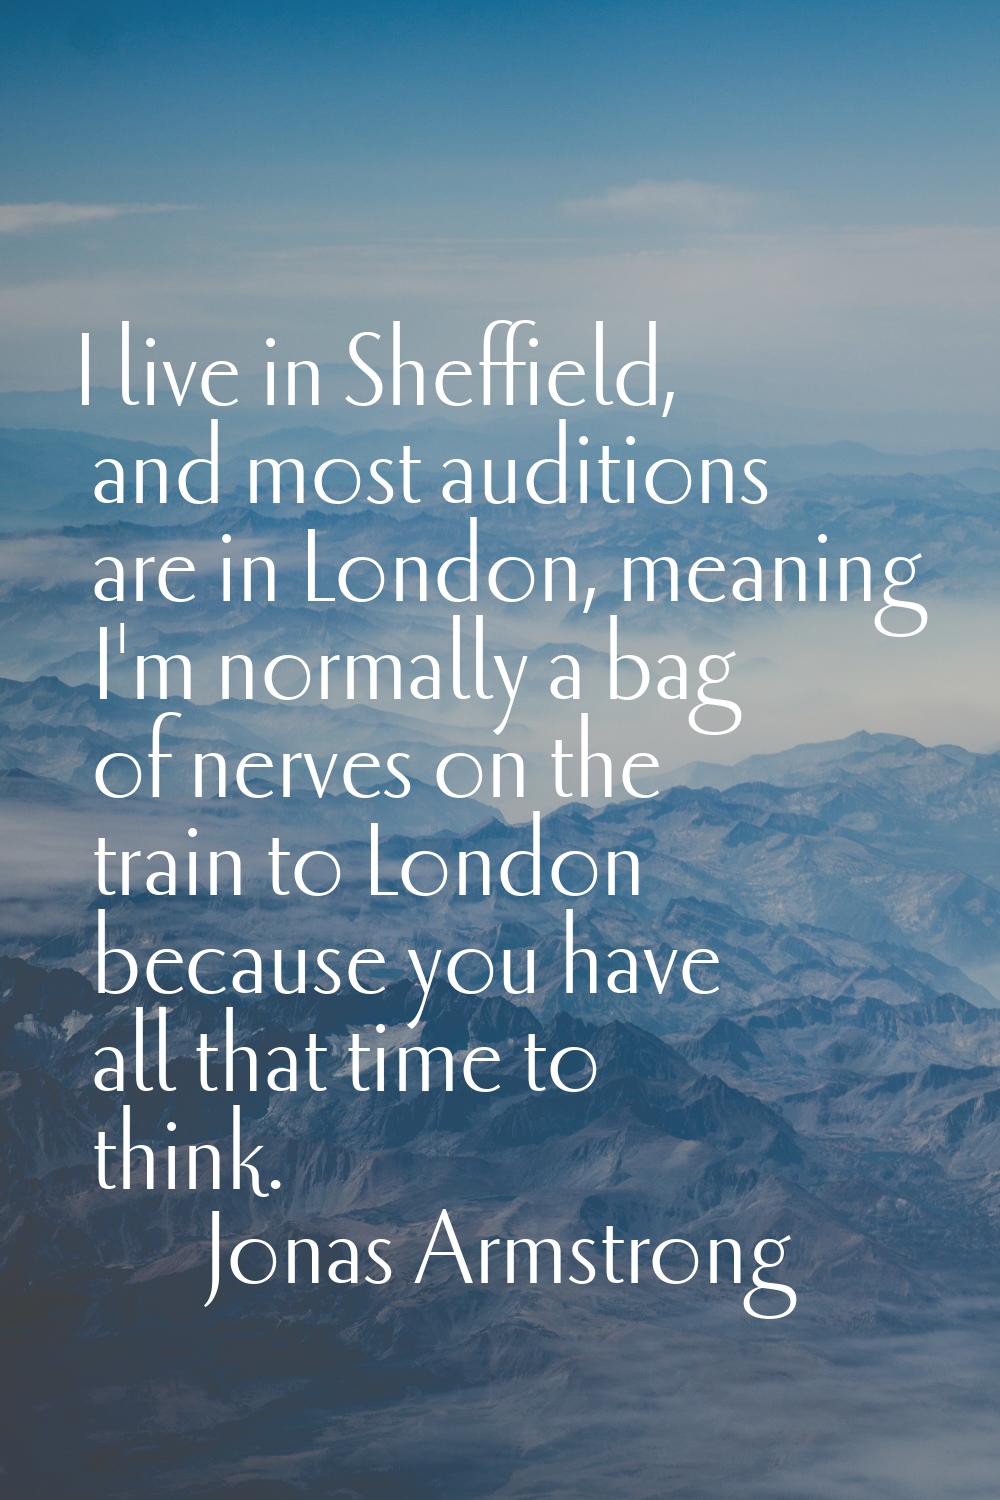 I live in Sheffield, and most auditions are in London, meaning I'm normally a bag of nerves on the 